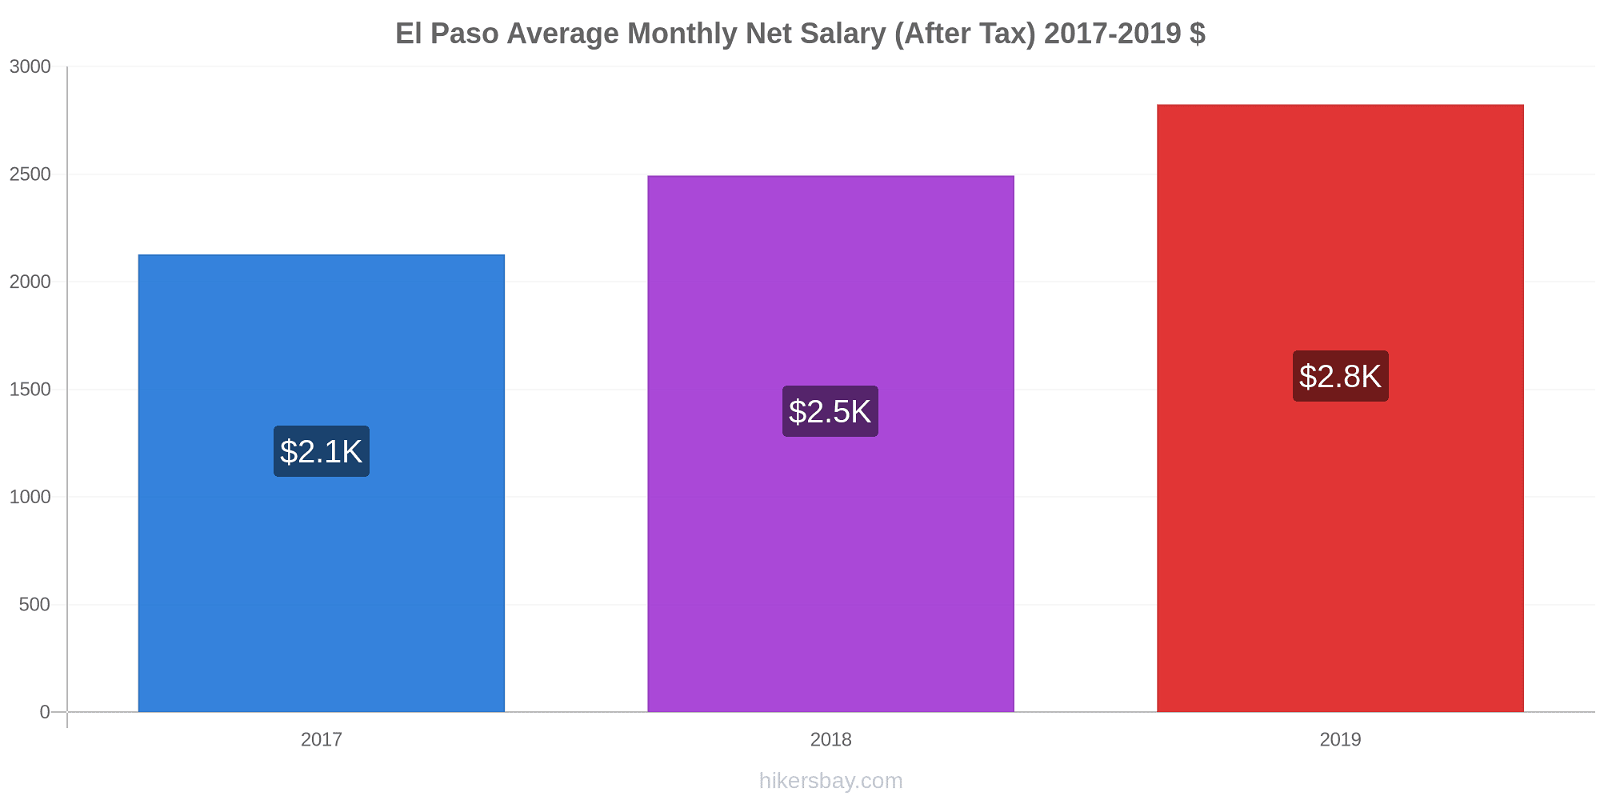 El Paso price changes Average Monthly Net Salary (After Tax) hikersbay.com